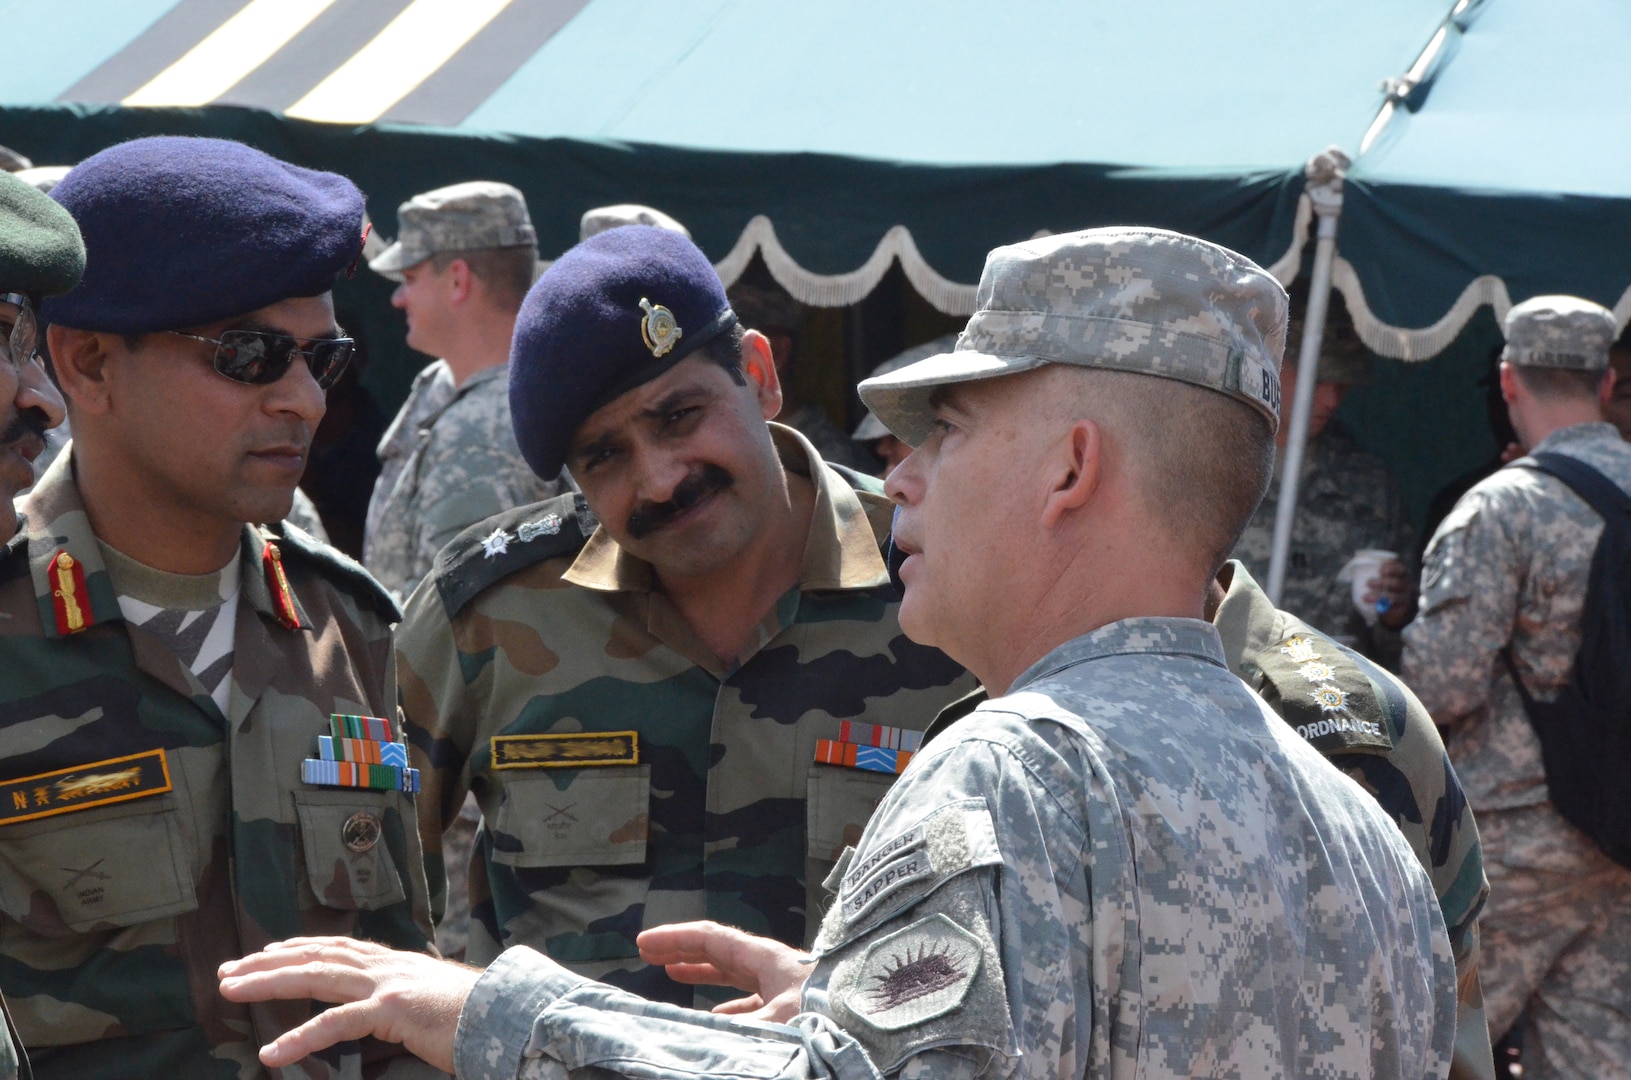 Col. Steven Buethe speaks with Indian Army leadership during a social event following the opening ceremony for Yudh Abhyas 2014 at Chaubattia Cantonment, India, on Sept. 17.